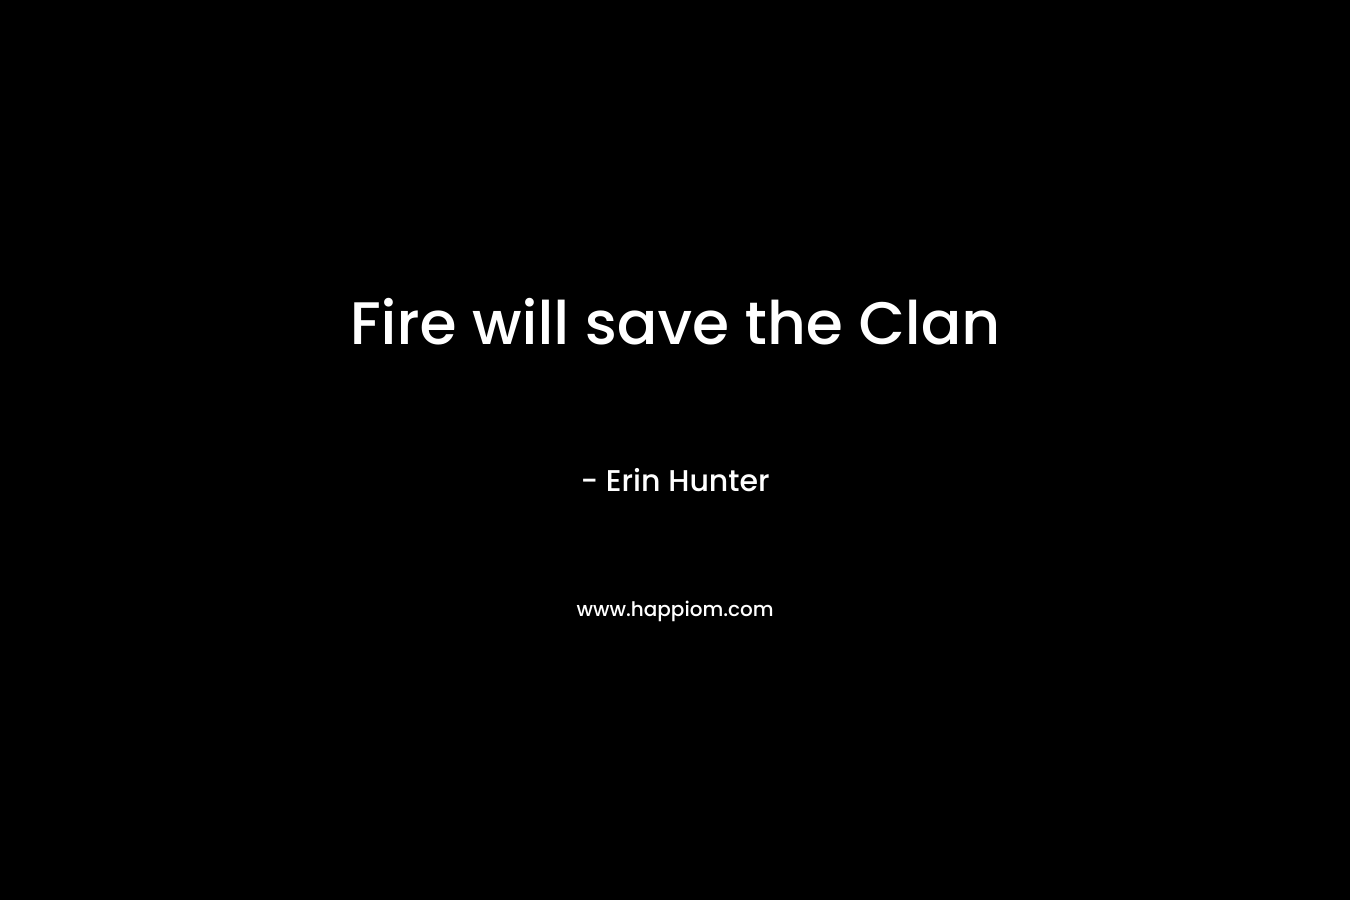 Fire will save the Clan